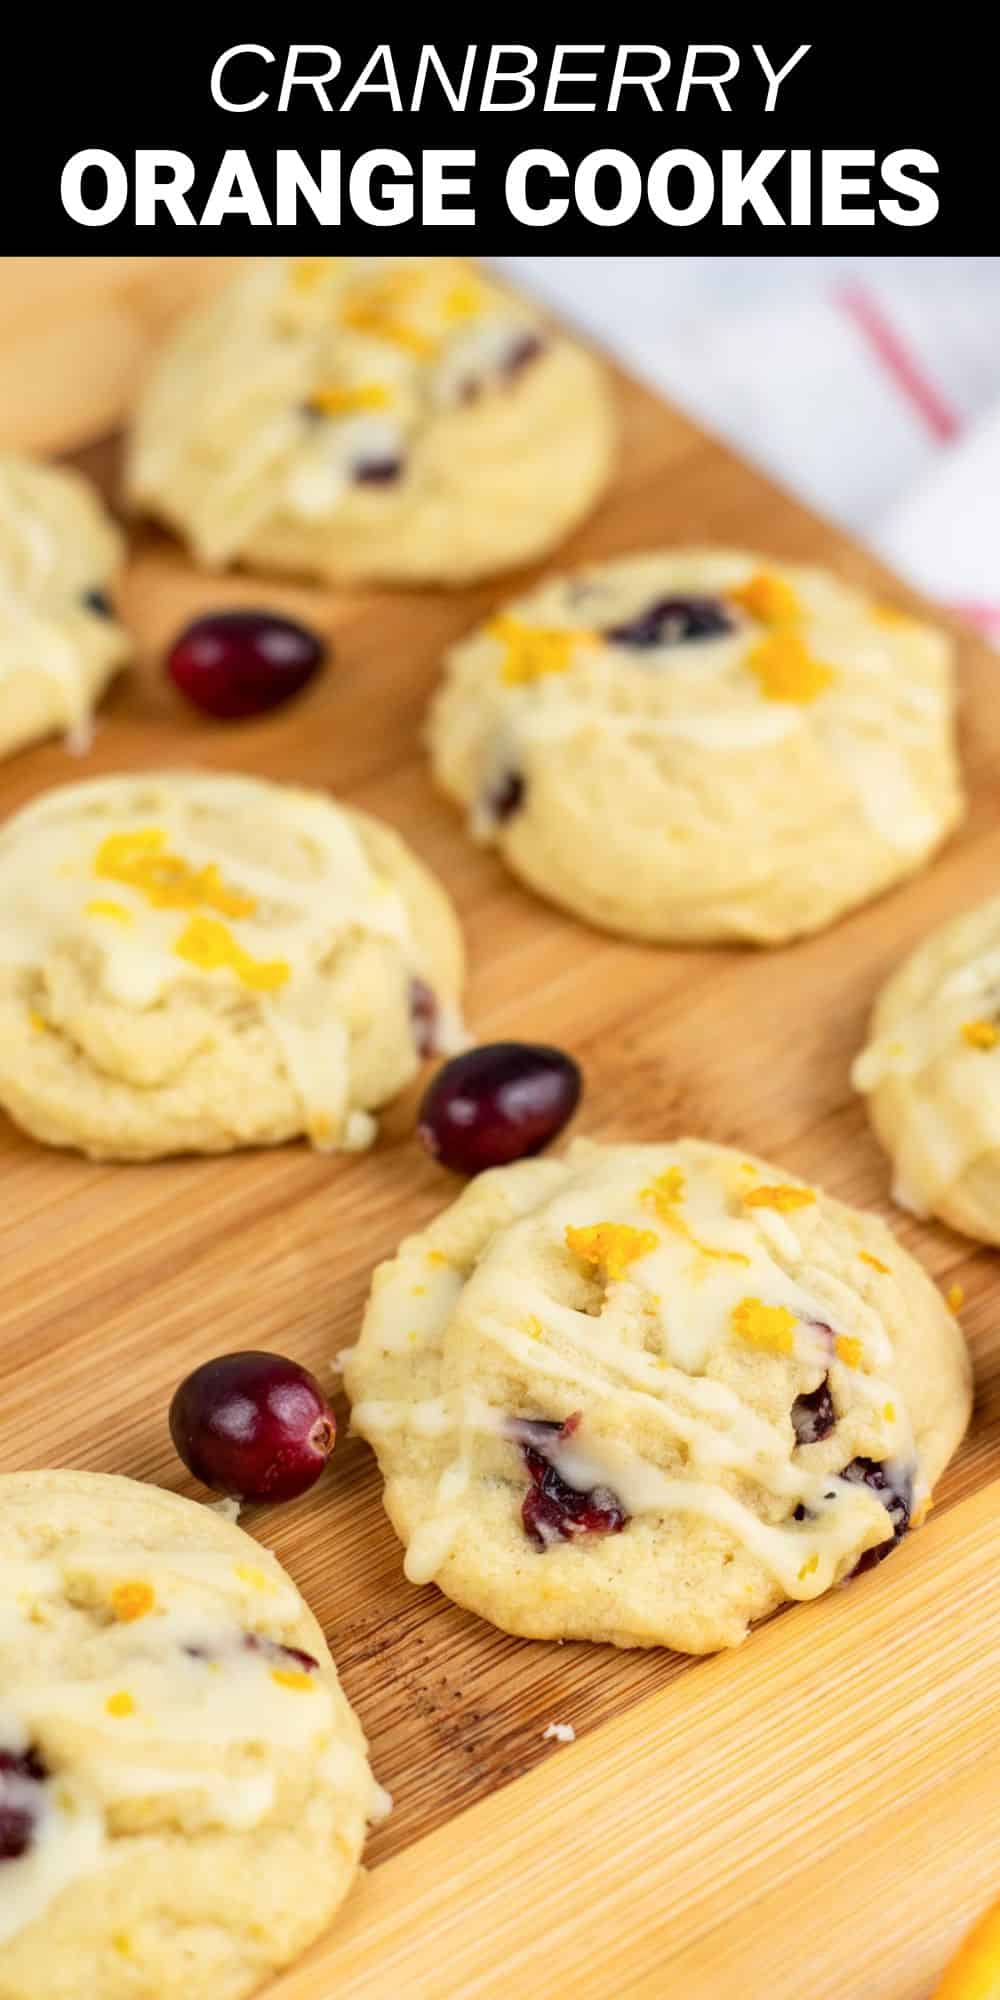 These delicious homemade Cranberry Orange Cookies have the most wonderful holiday flavors from zesty oranges, tangy cranberries and a sweet orange glaze that’s drizzled over the tops. They're perfect cookies to add to your holiday season baking lineup.